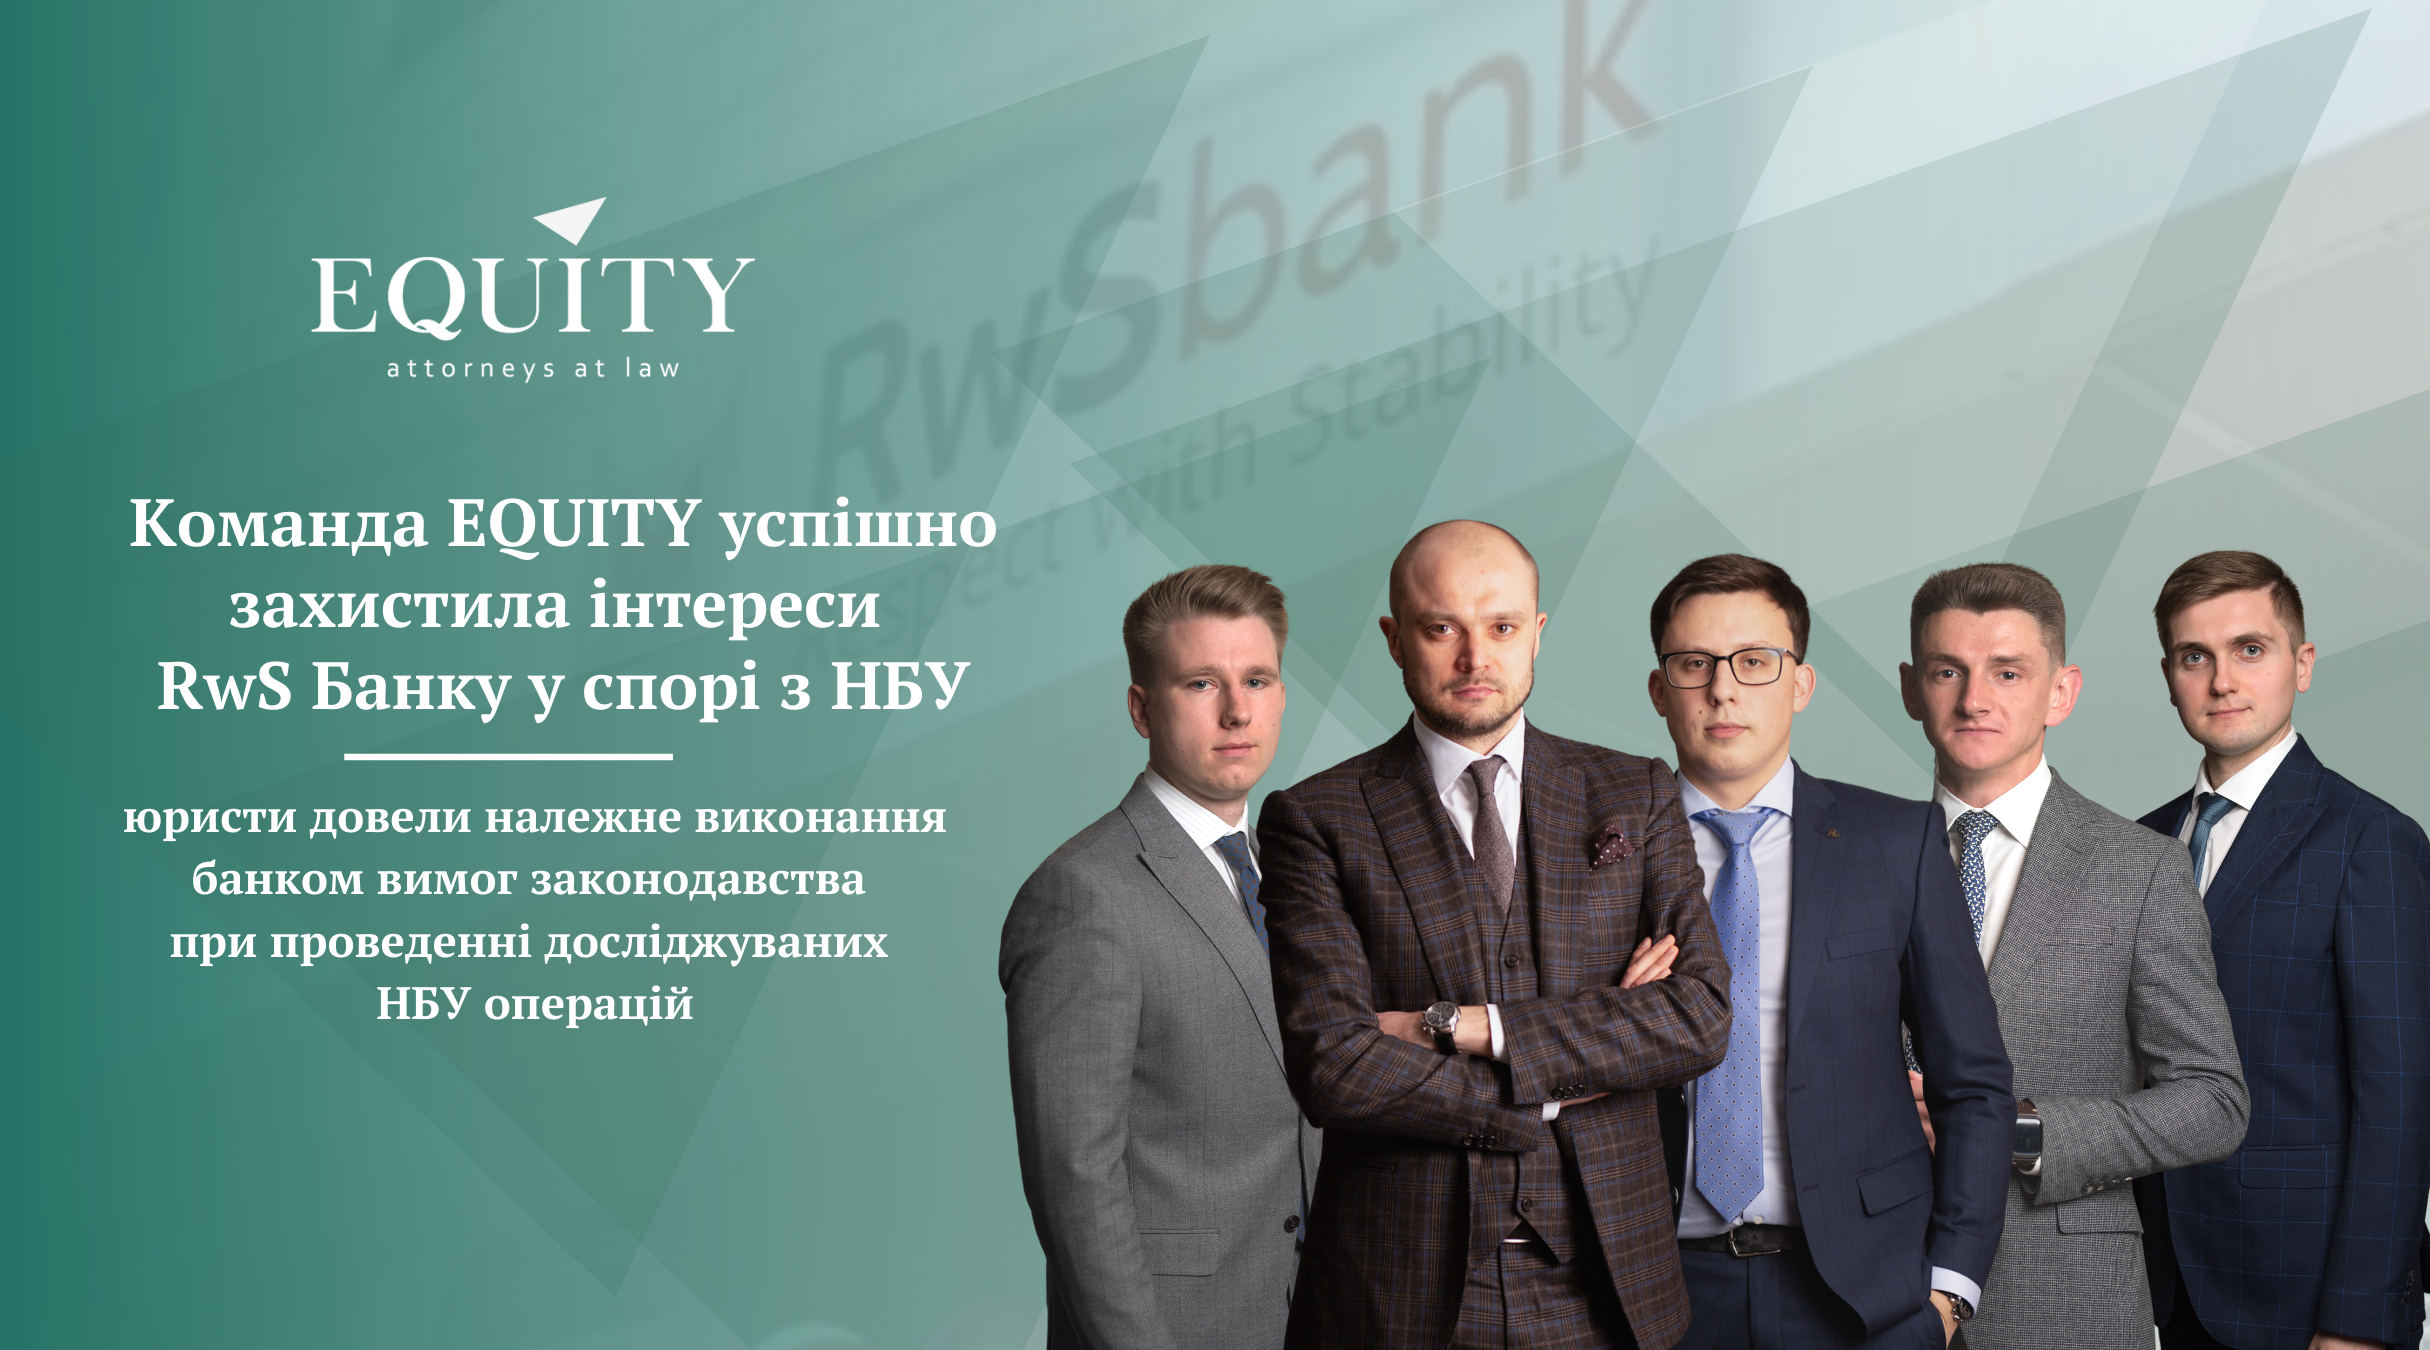 EQUITY team successfully protects RwS Bank interests in its dispute with NBU